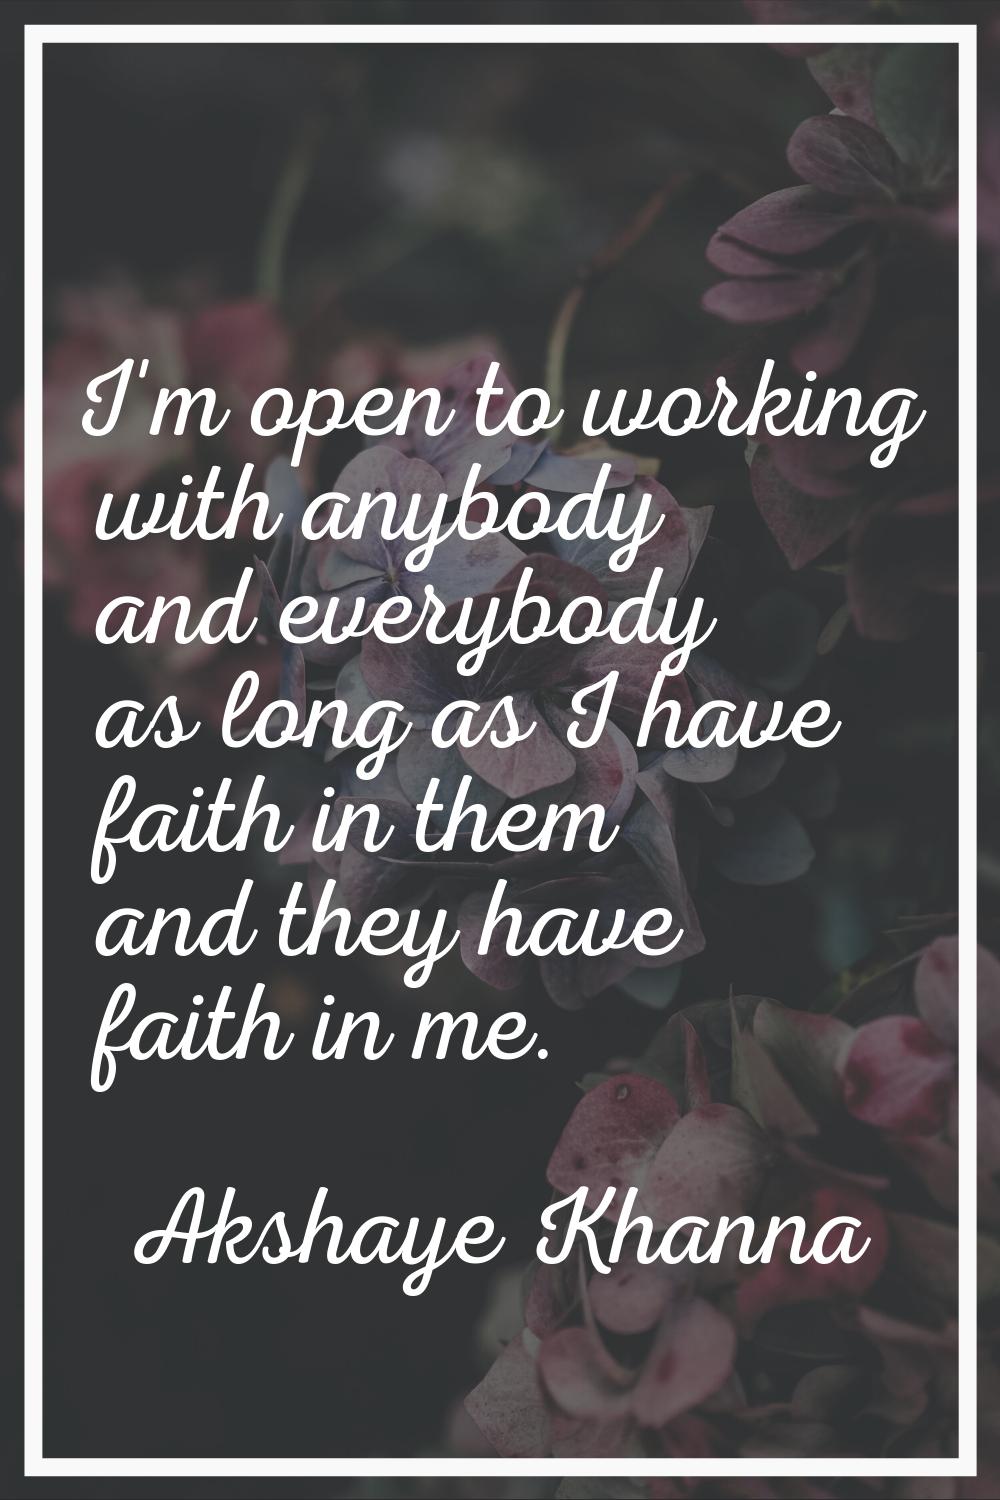 I'm open to working with anybody and everybody as long as I have faith in them and they have faith 